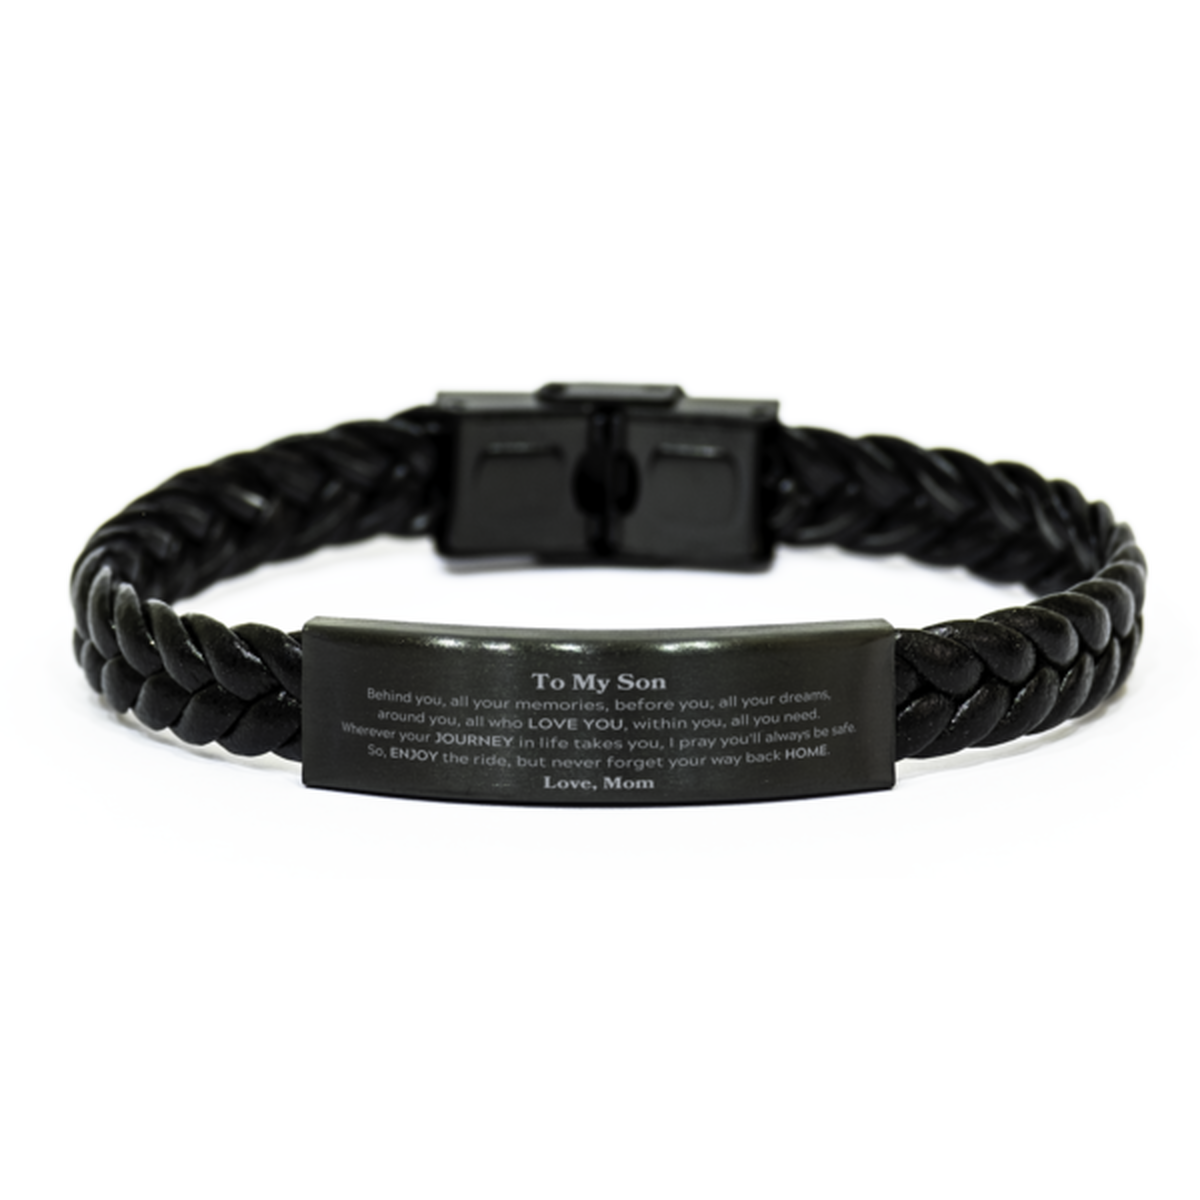 To My Son Graduation Gifts from Mom, Son Braided Leather Bracelet Christmas Birthday Gifts for Son Behind you, all your memories, before you, all your dreams. Love, Mom